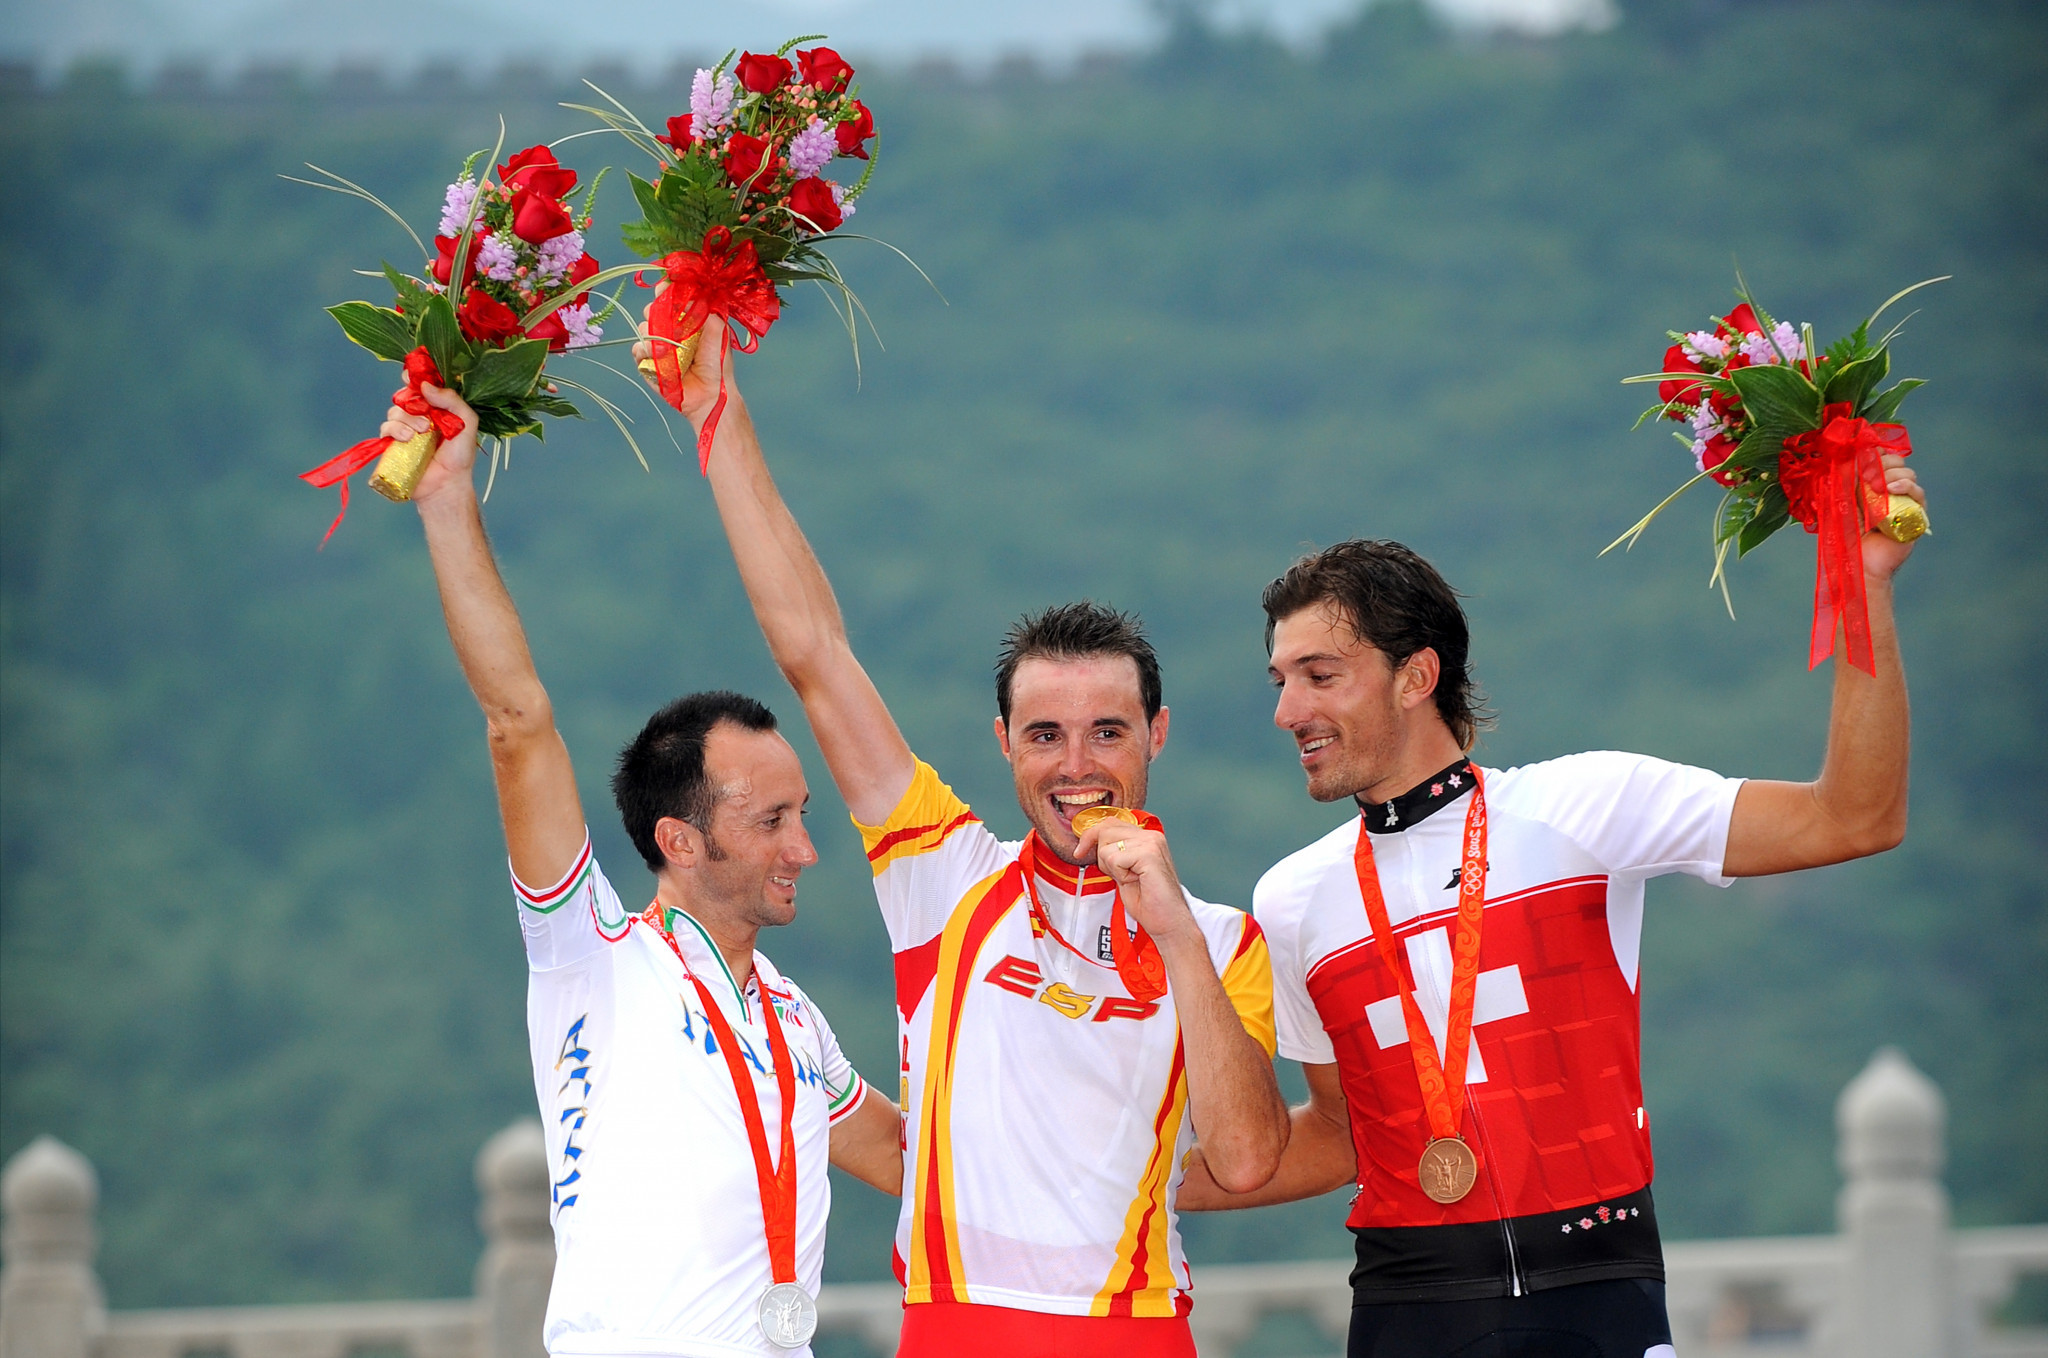 Italy's Davide Rebellin, left, celebrates winning an Olympic silver medal in the men's road race at Beijing 2008, but was later stripped of it after testing positive for banned drugs ©Getty Images